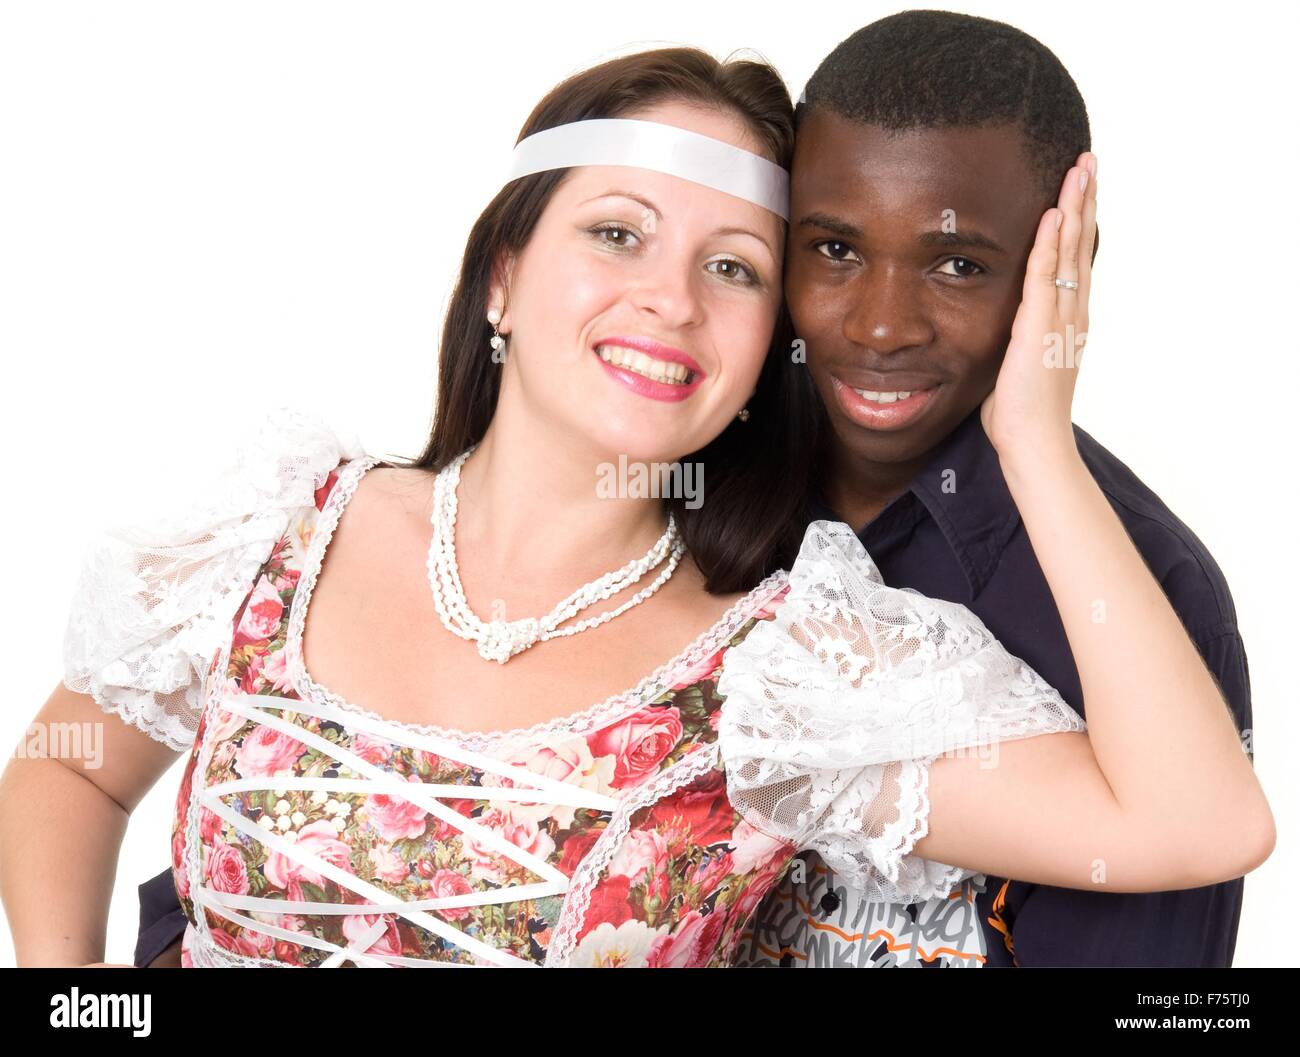 white wife and black